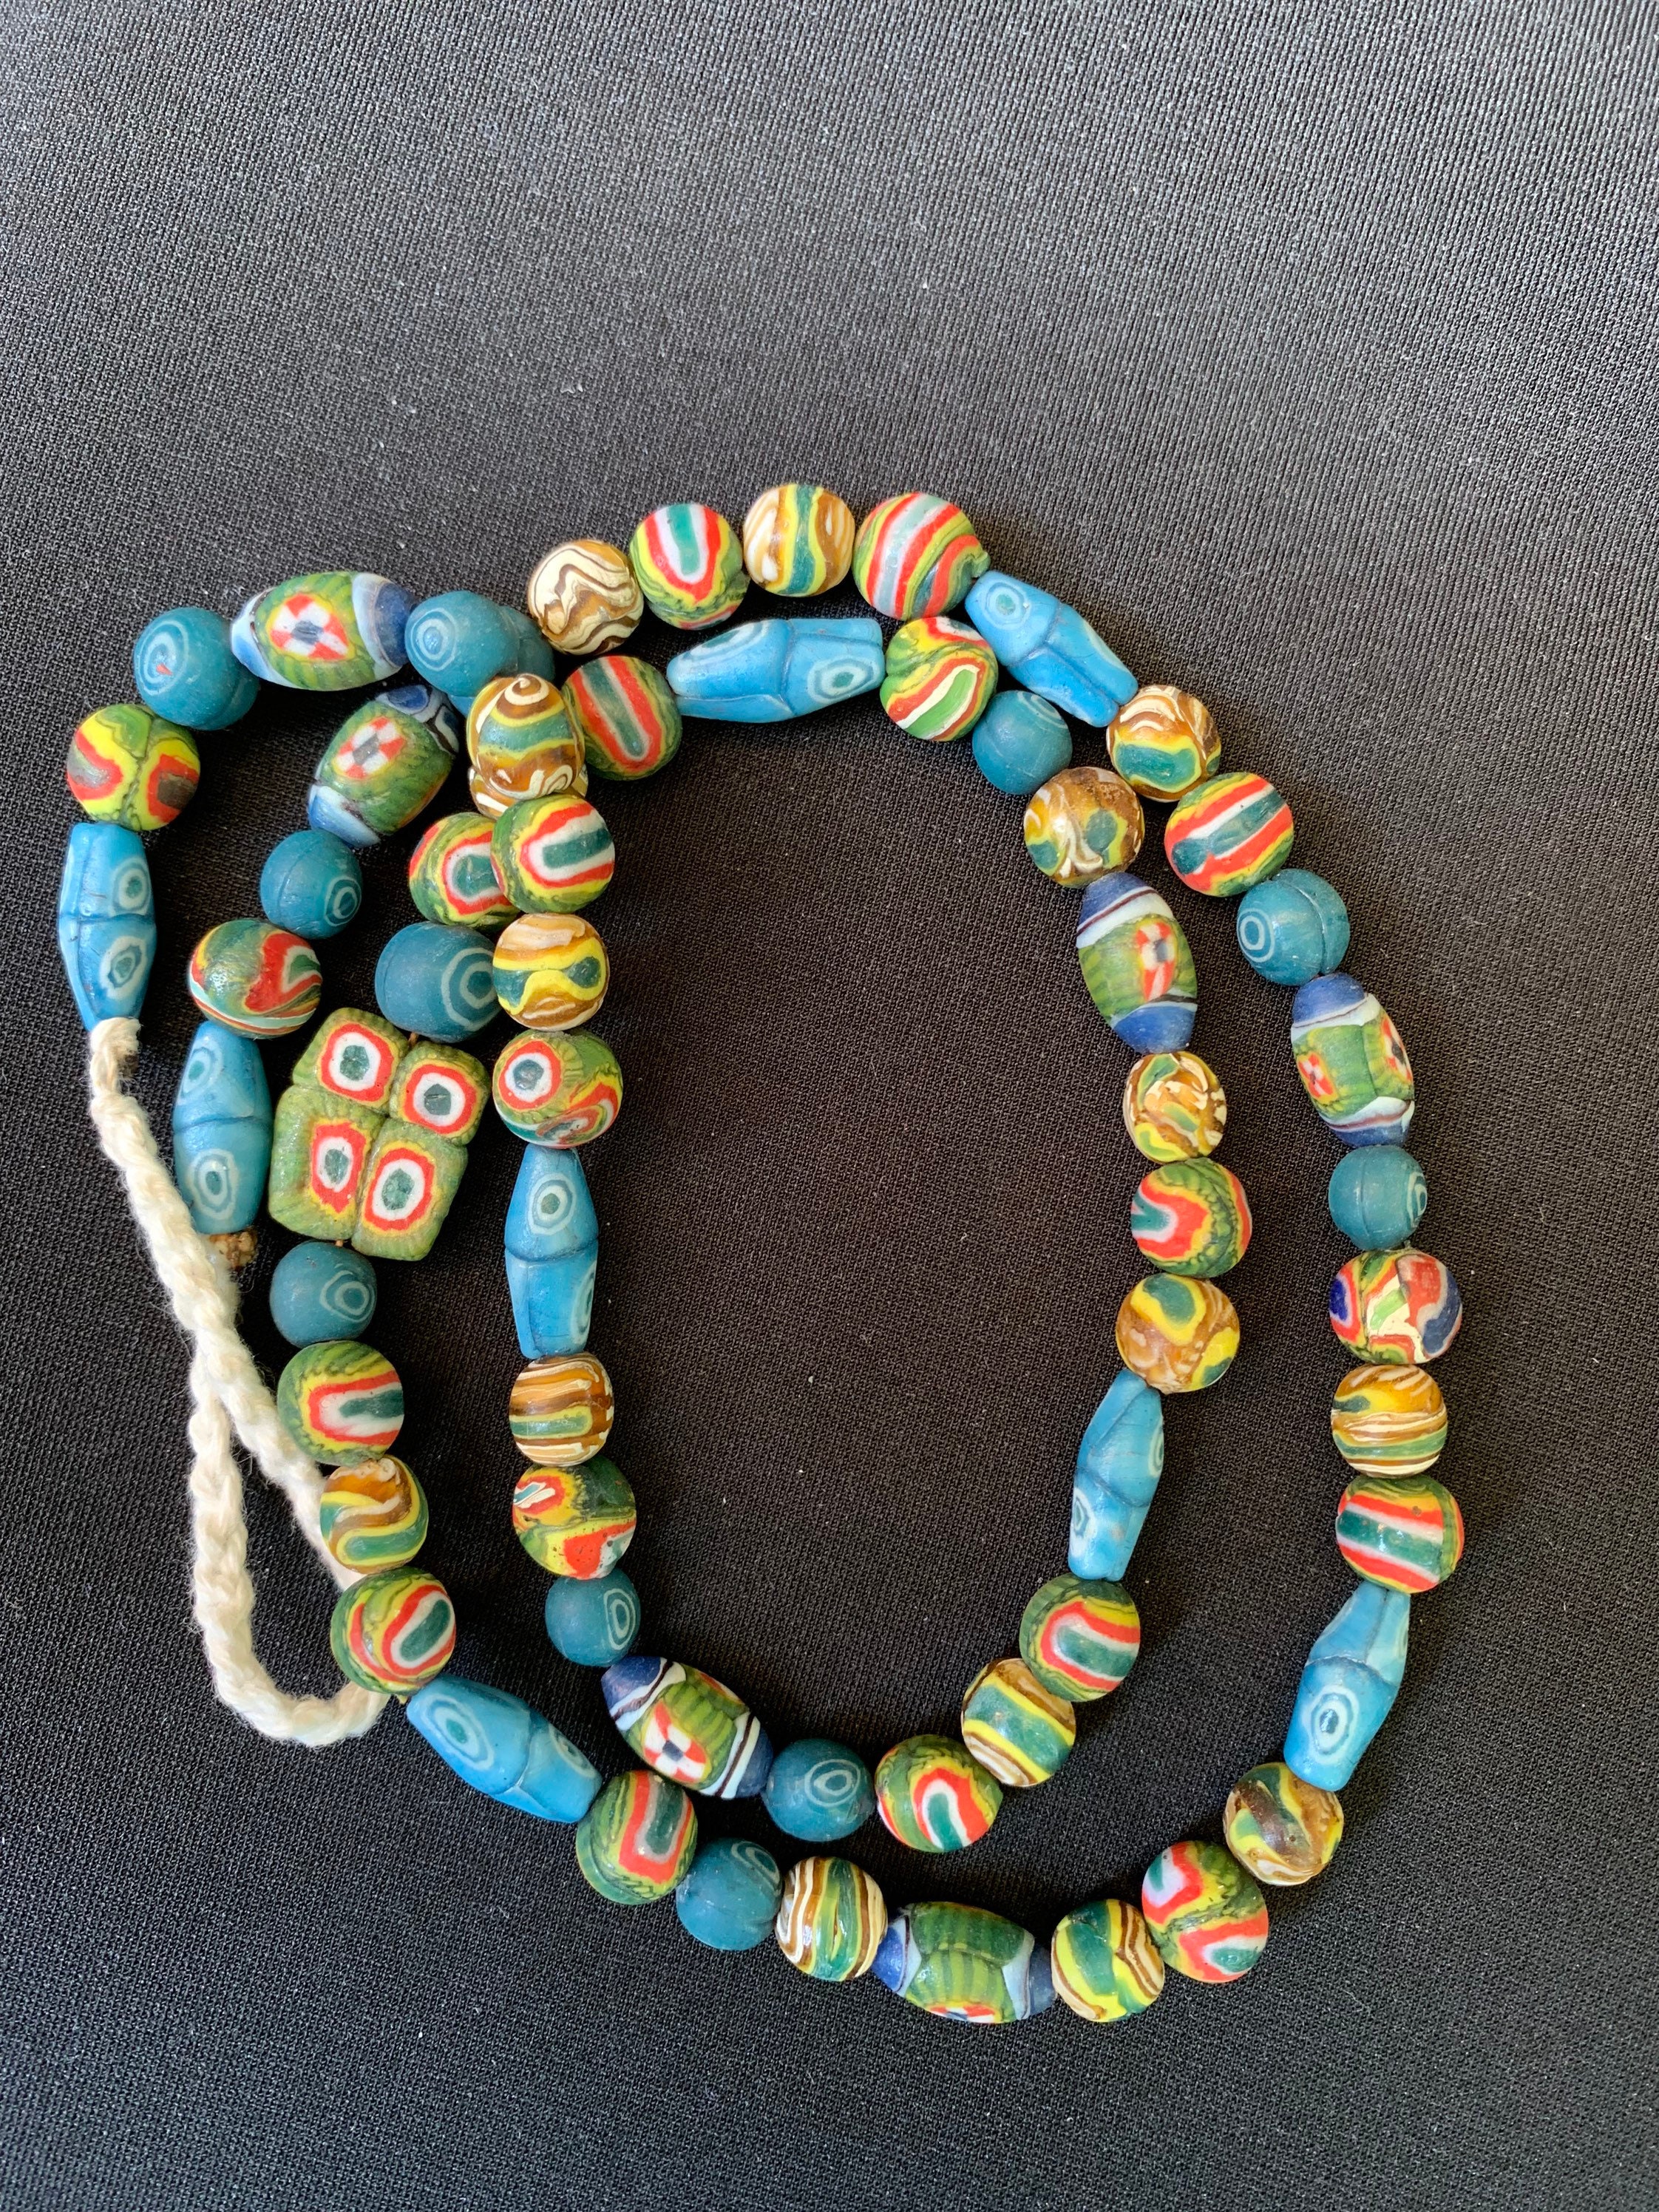 Antique Islamic Glass Trade Beads Multiple Collectible Trade